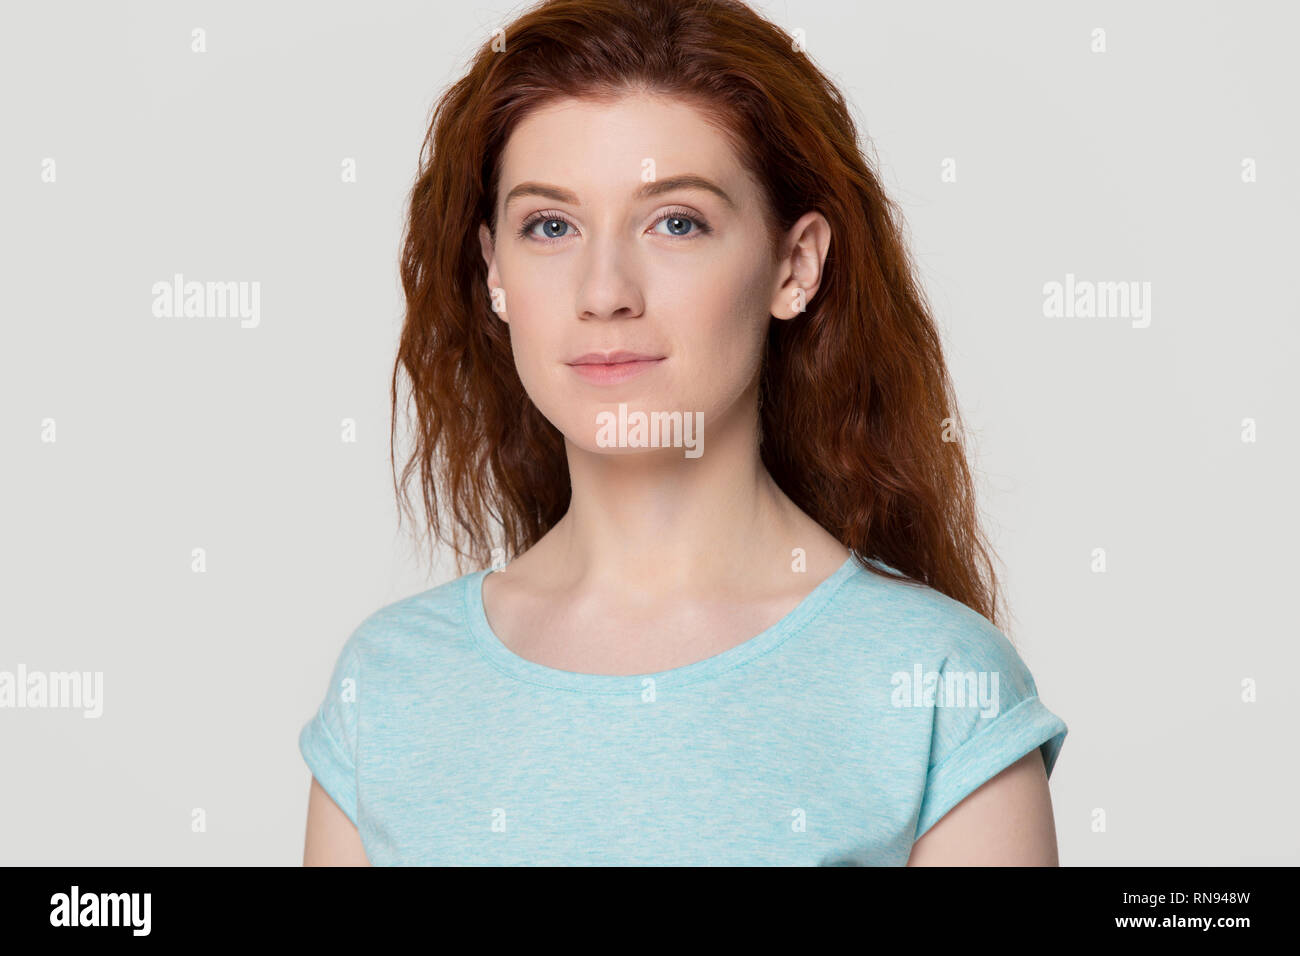 Headshot of young woman with beautiful face and red hair Stock Photo